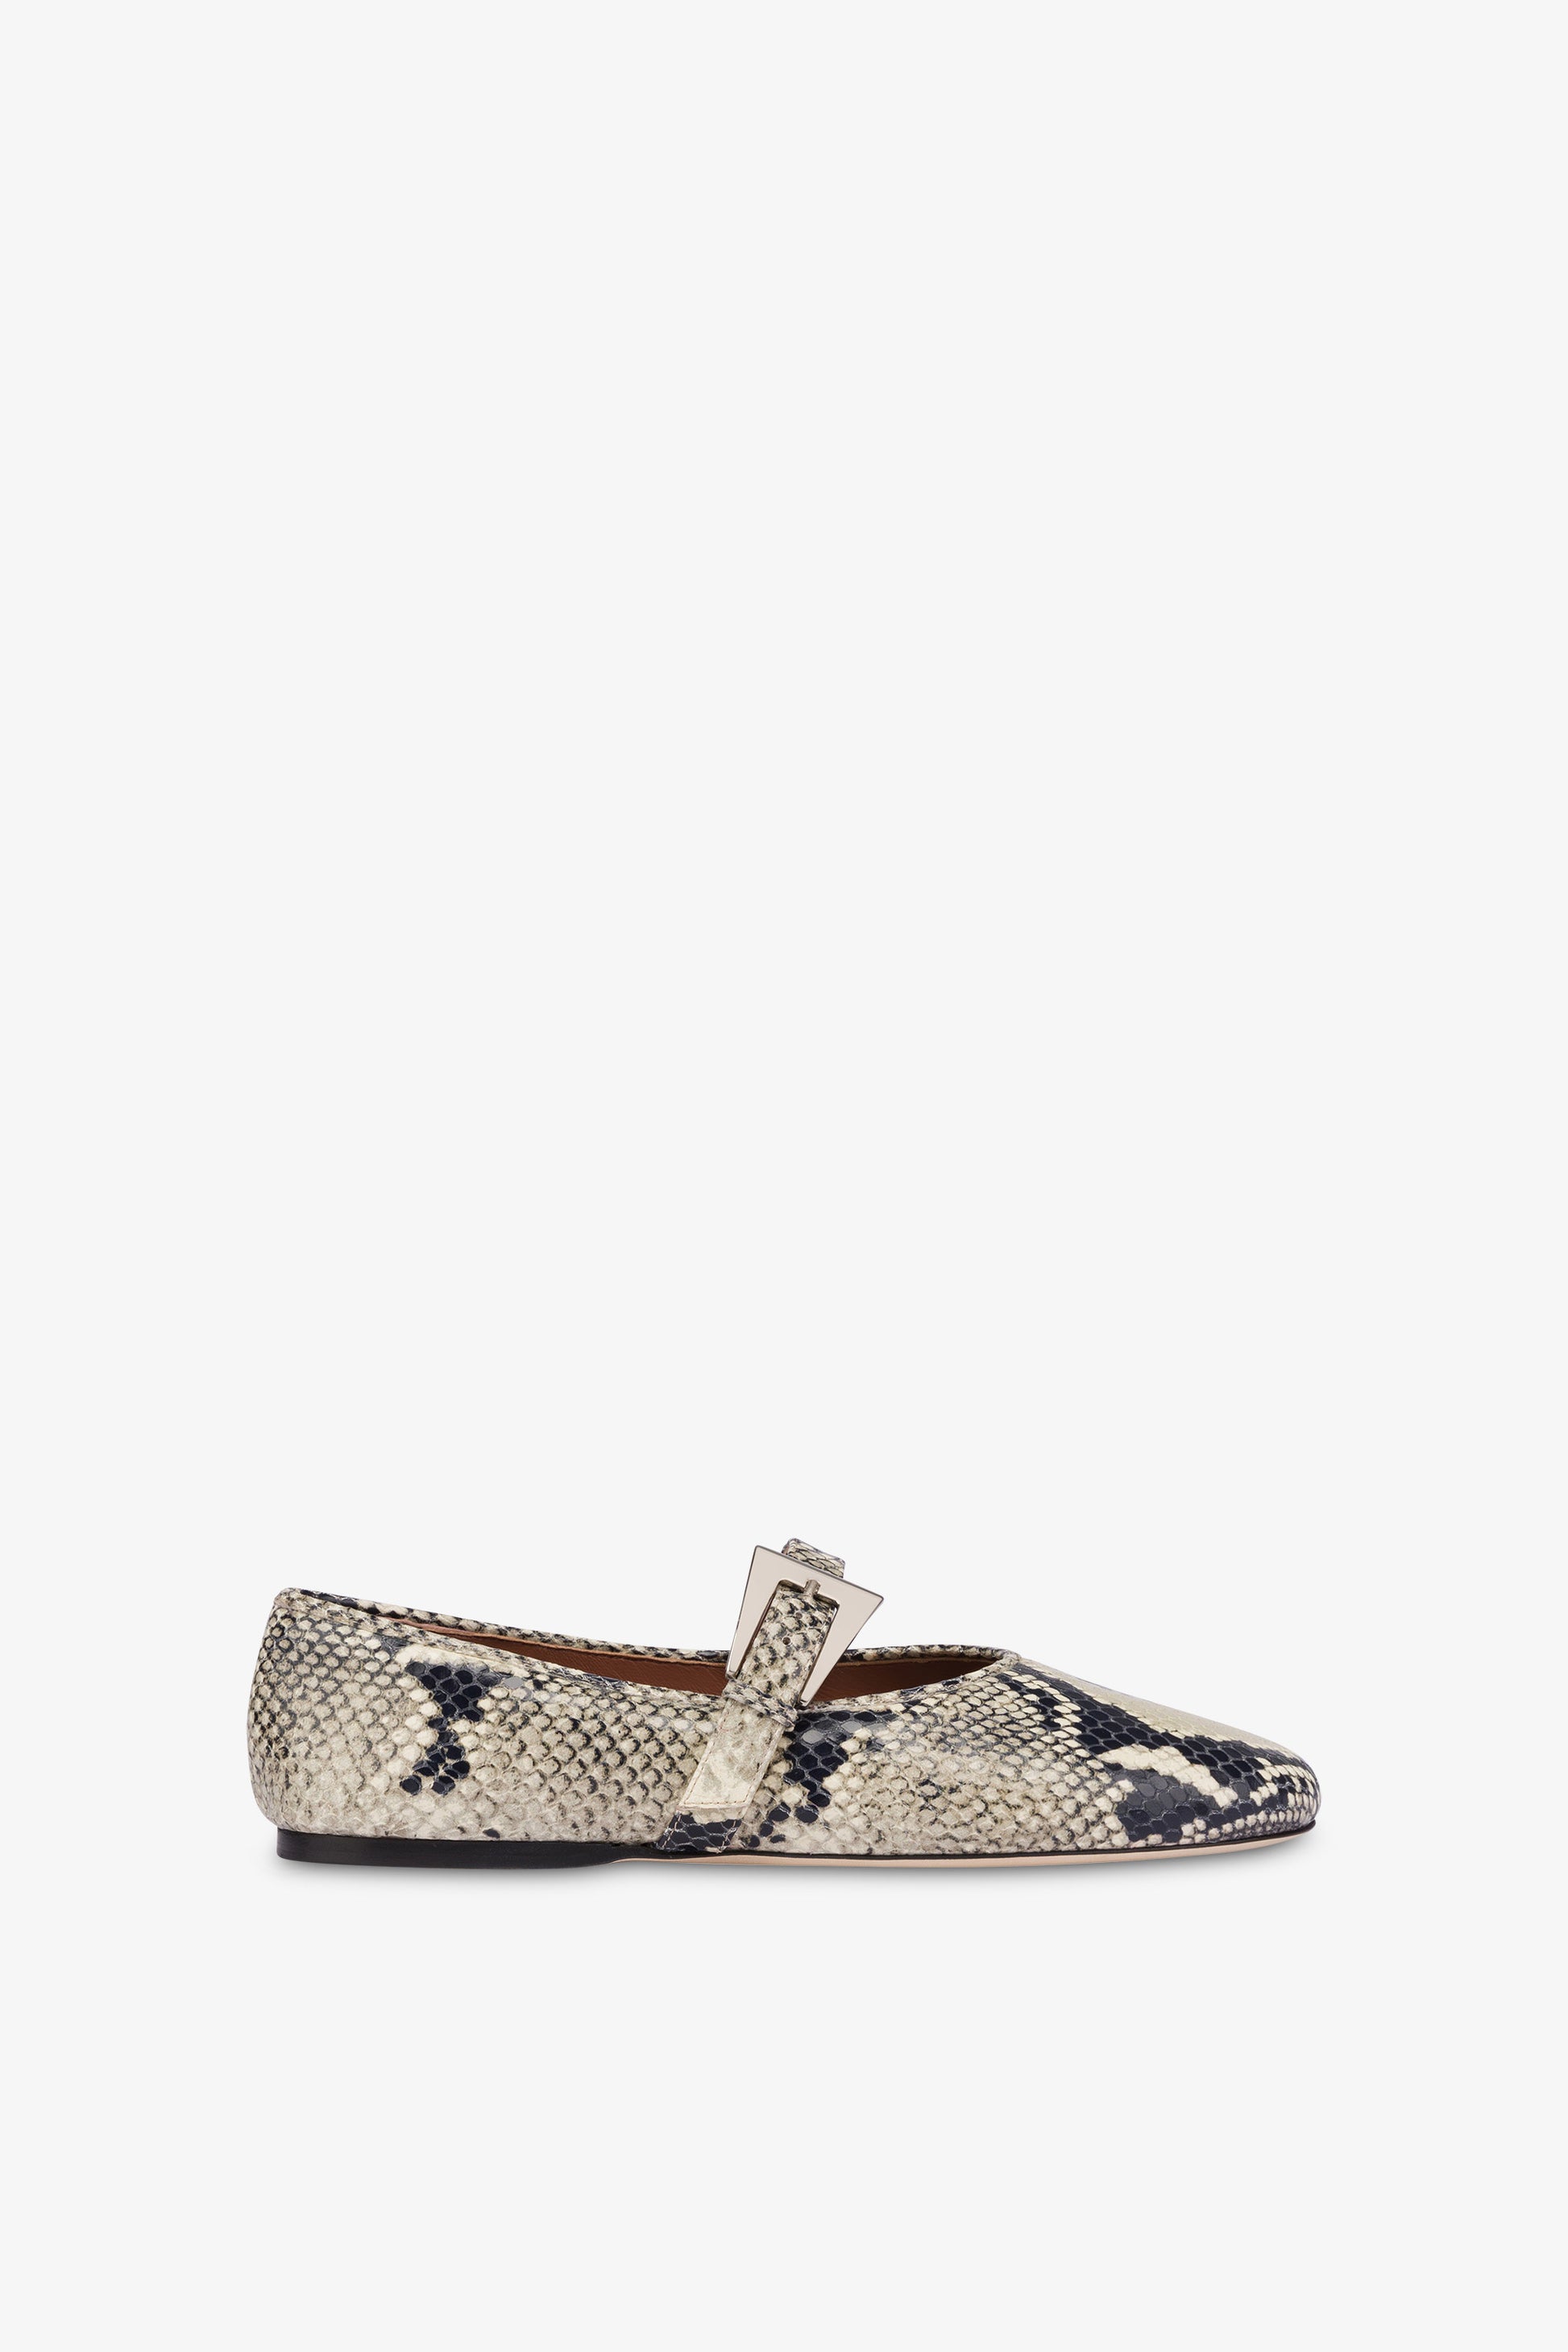 Ballet flats in natural python-printed leather